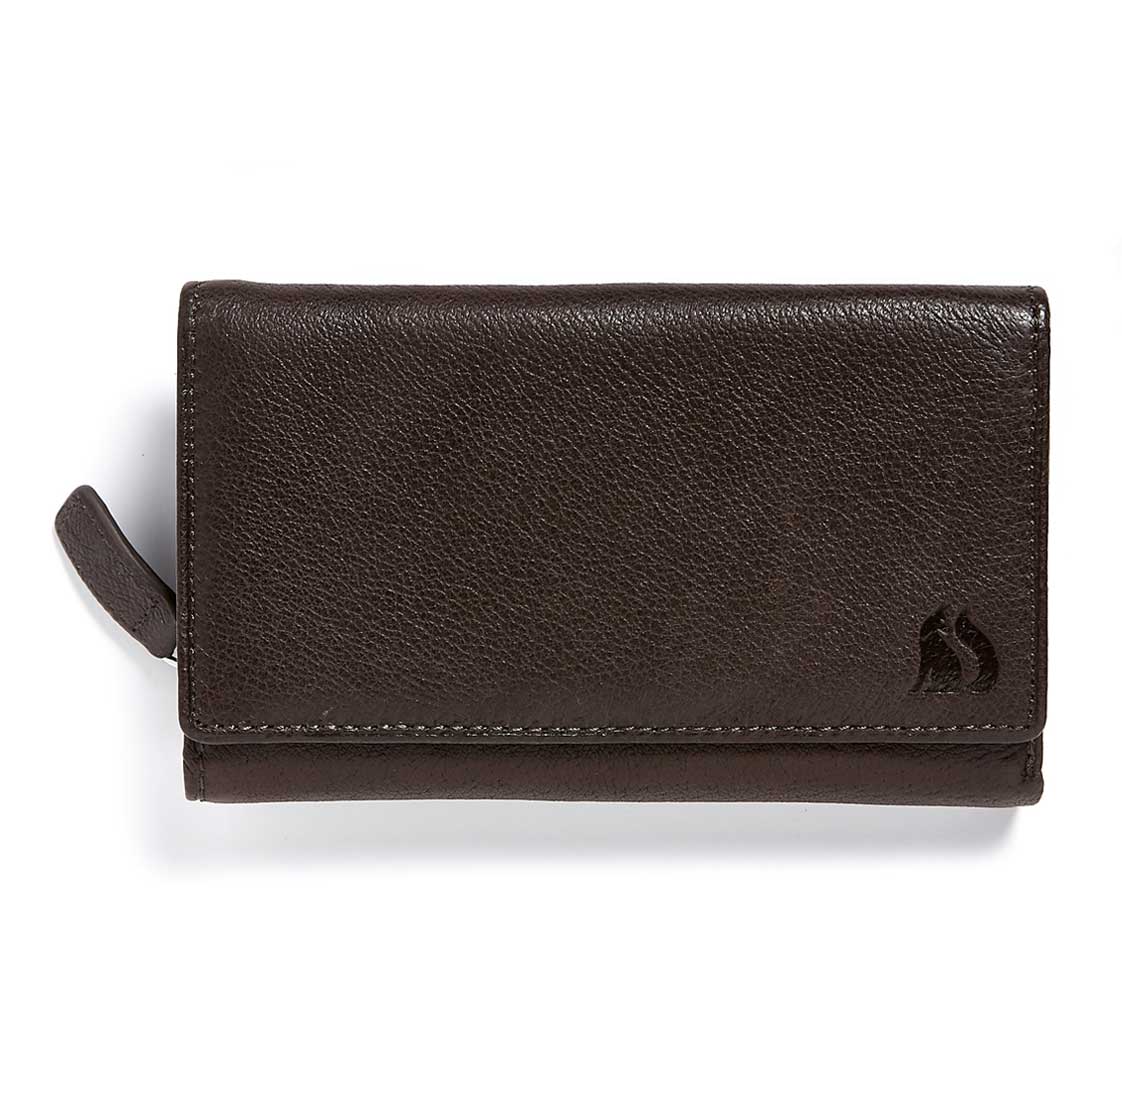 Foxfield Thirlmere brown Leather Purse